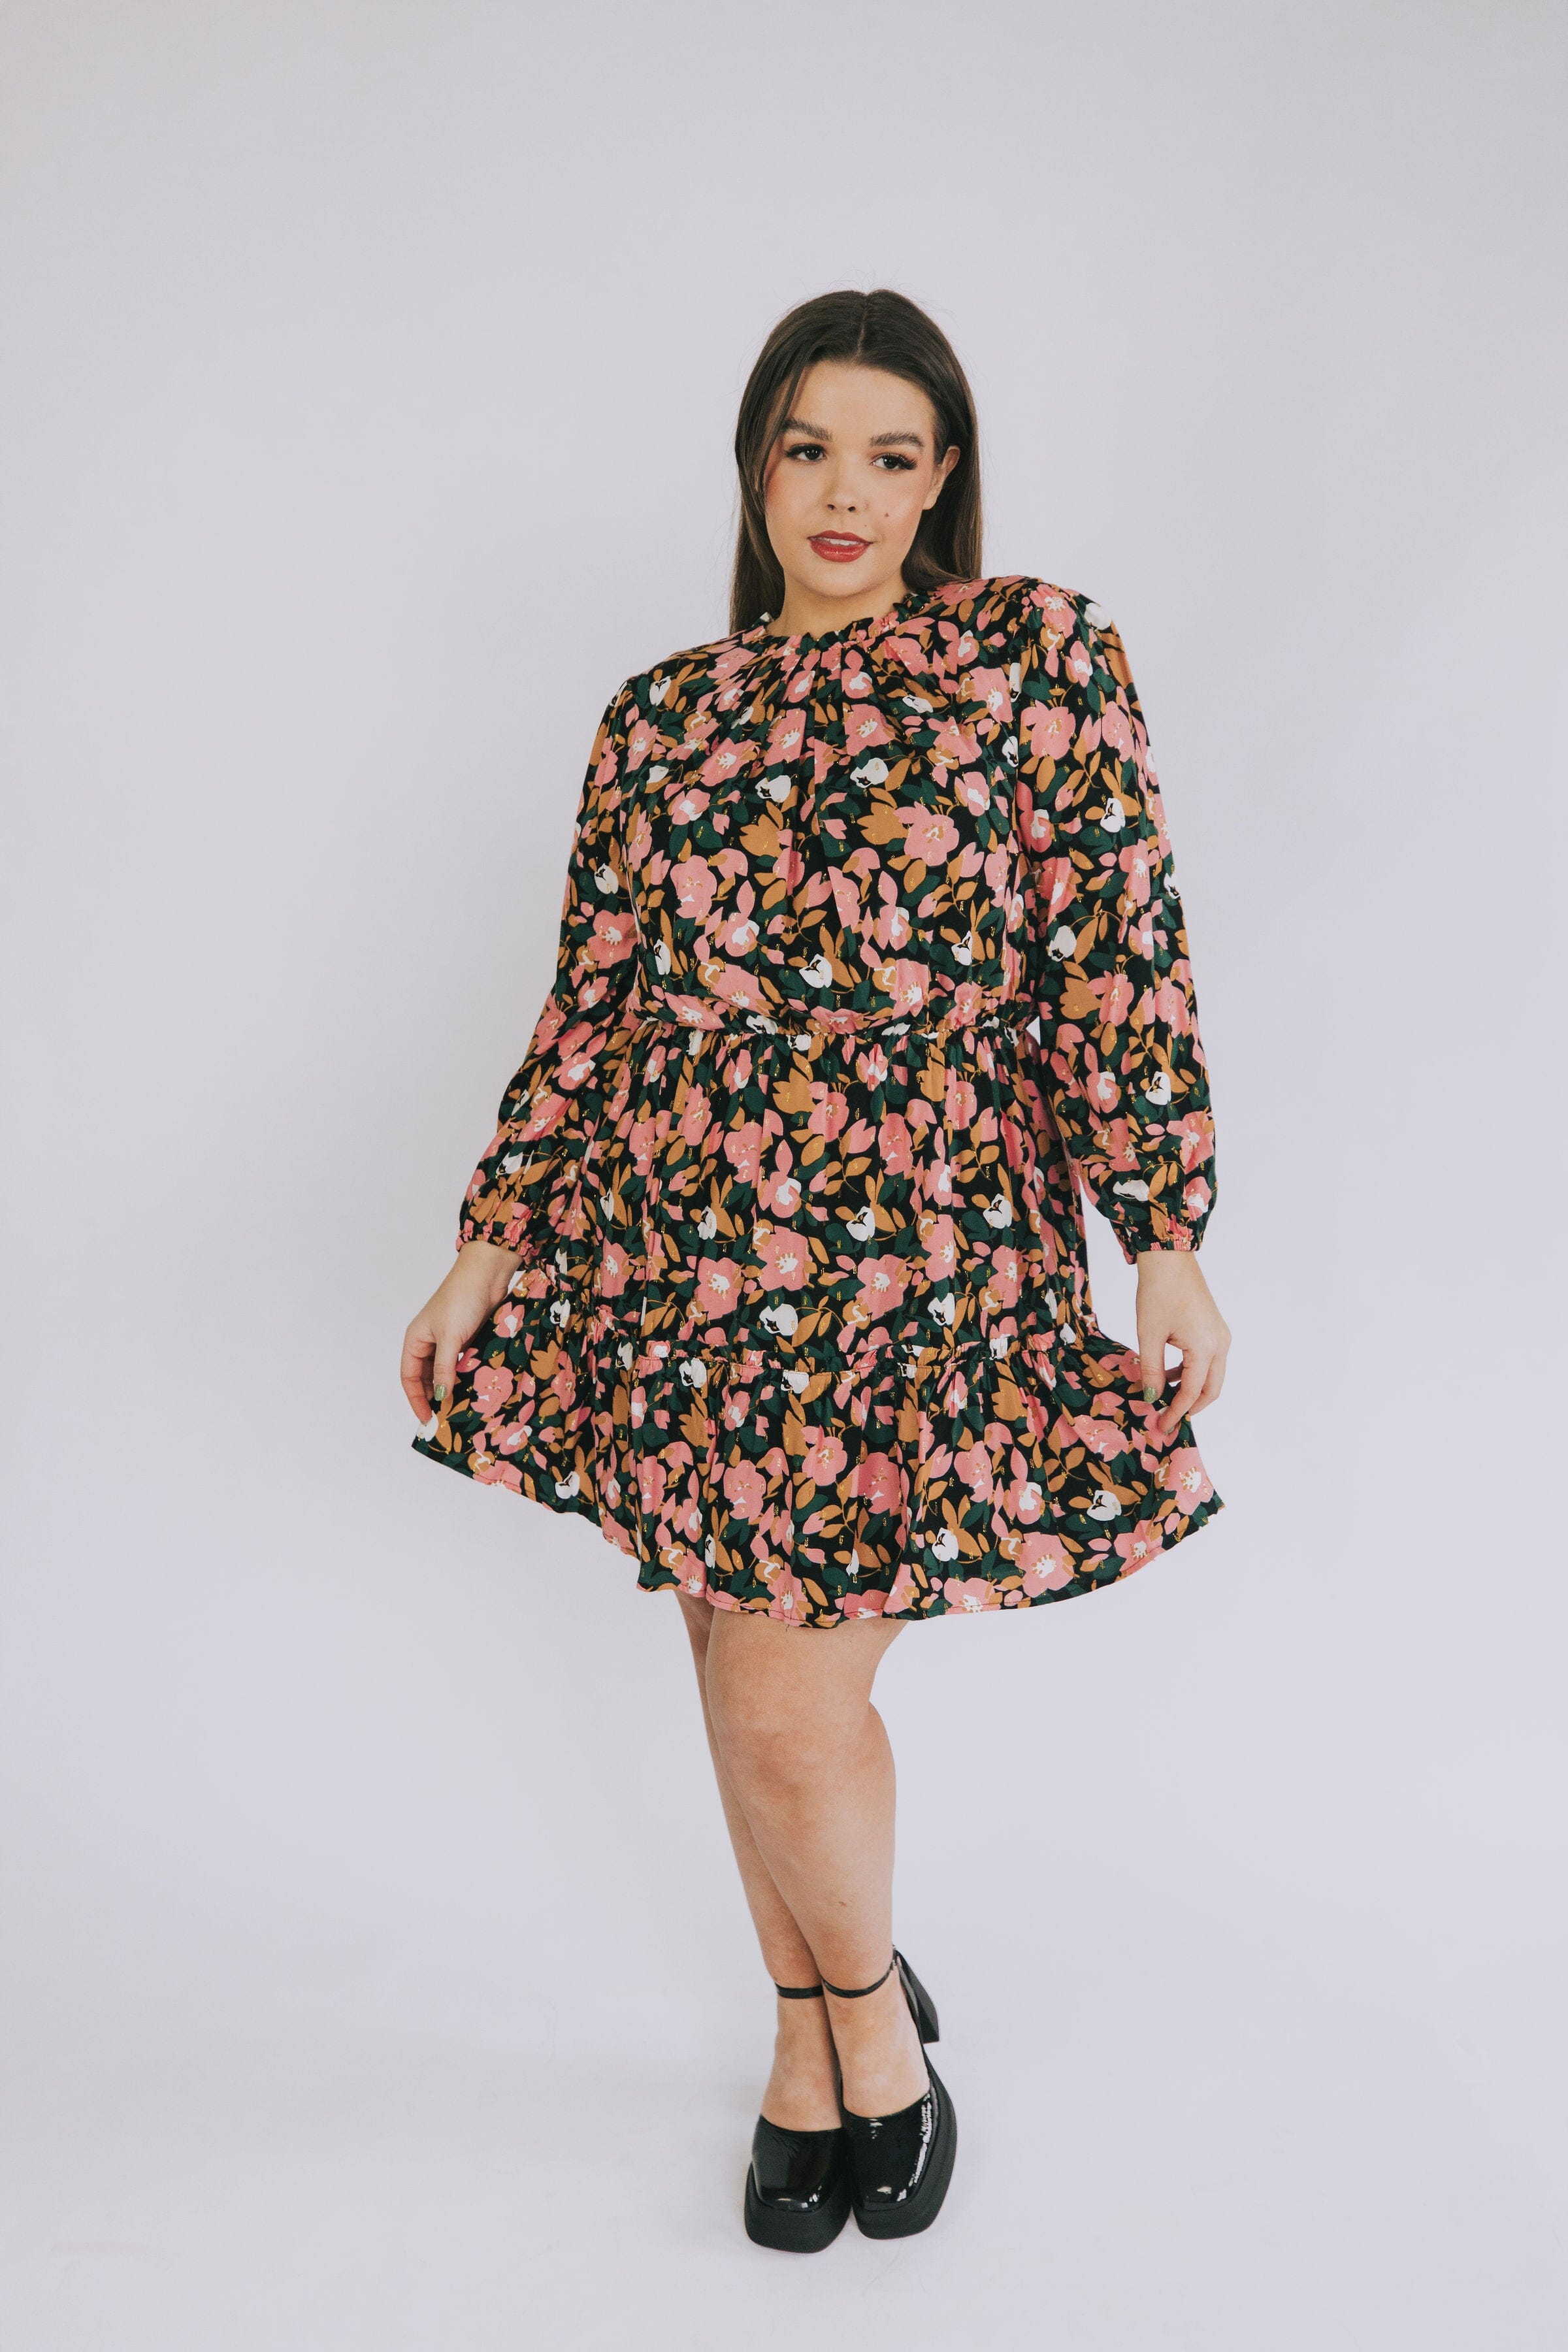 PLUS SIZE - Expecting You Dress